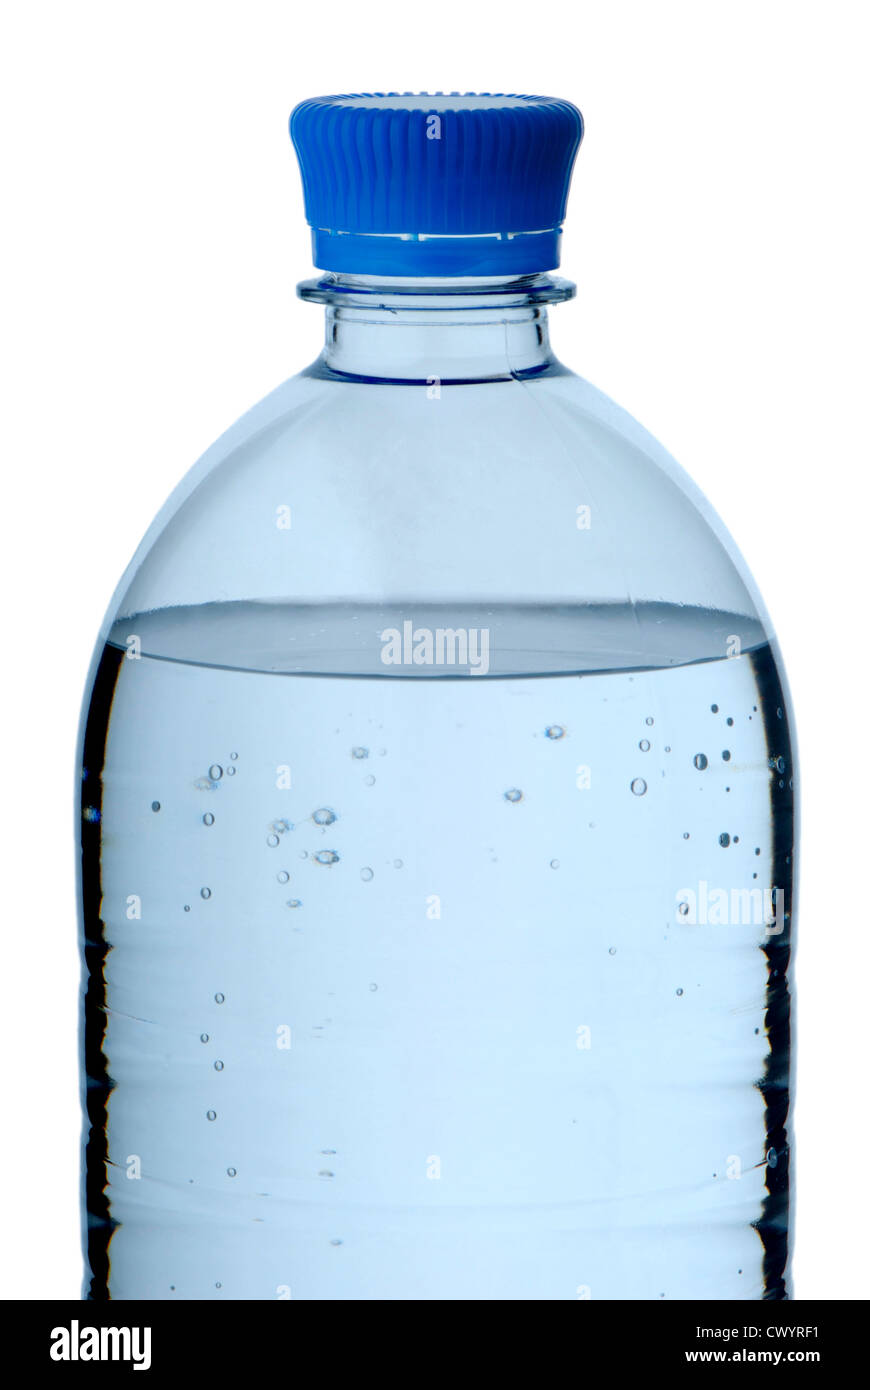 https://c8.alamy.com/comp/CWYRF1/plastic-bottle-of-mineral-water-isolated-on-white-CWYRF1.jpg